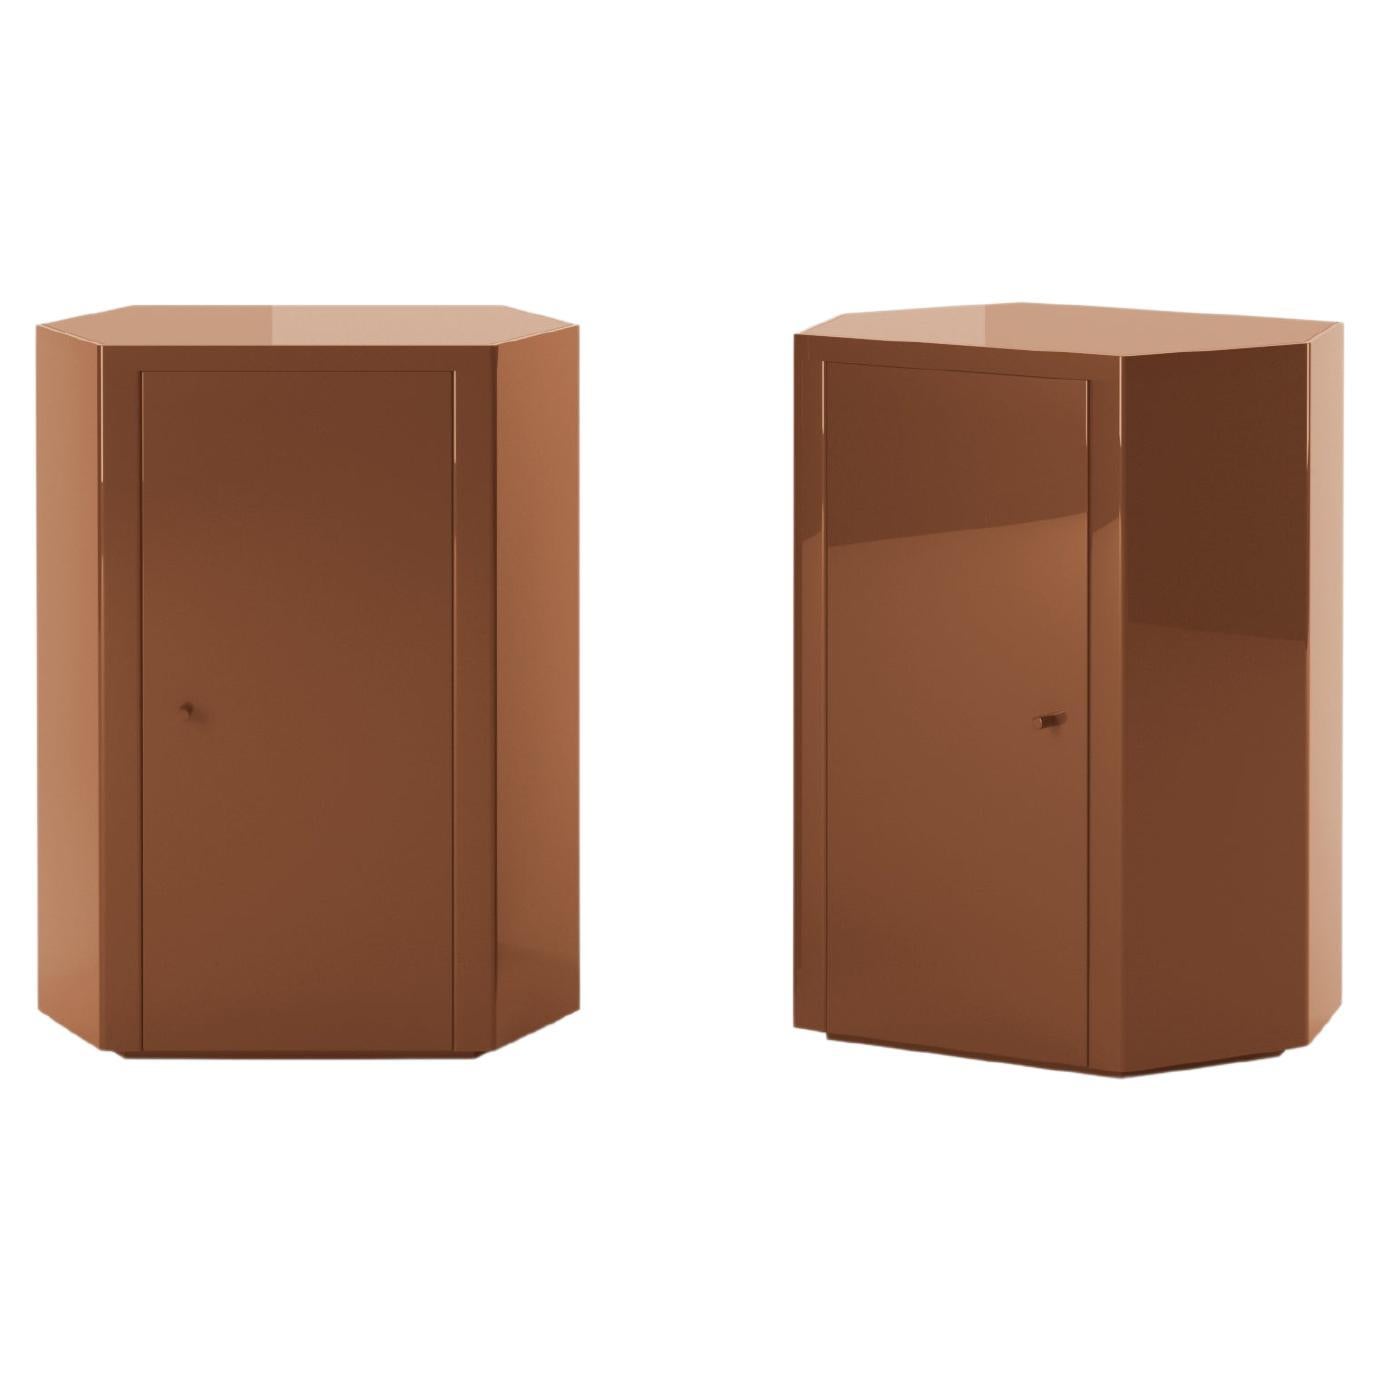 Pair of Park Night Stands in Cider Orange Brown Lacquer by Yaniv Chen for Lemon For Sale